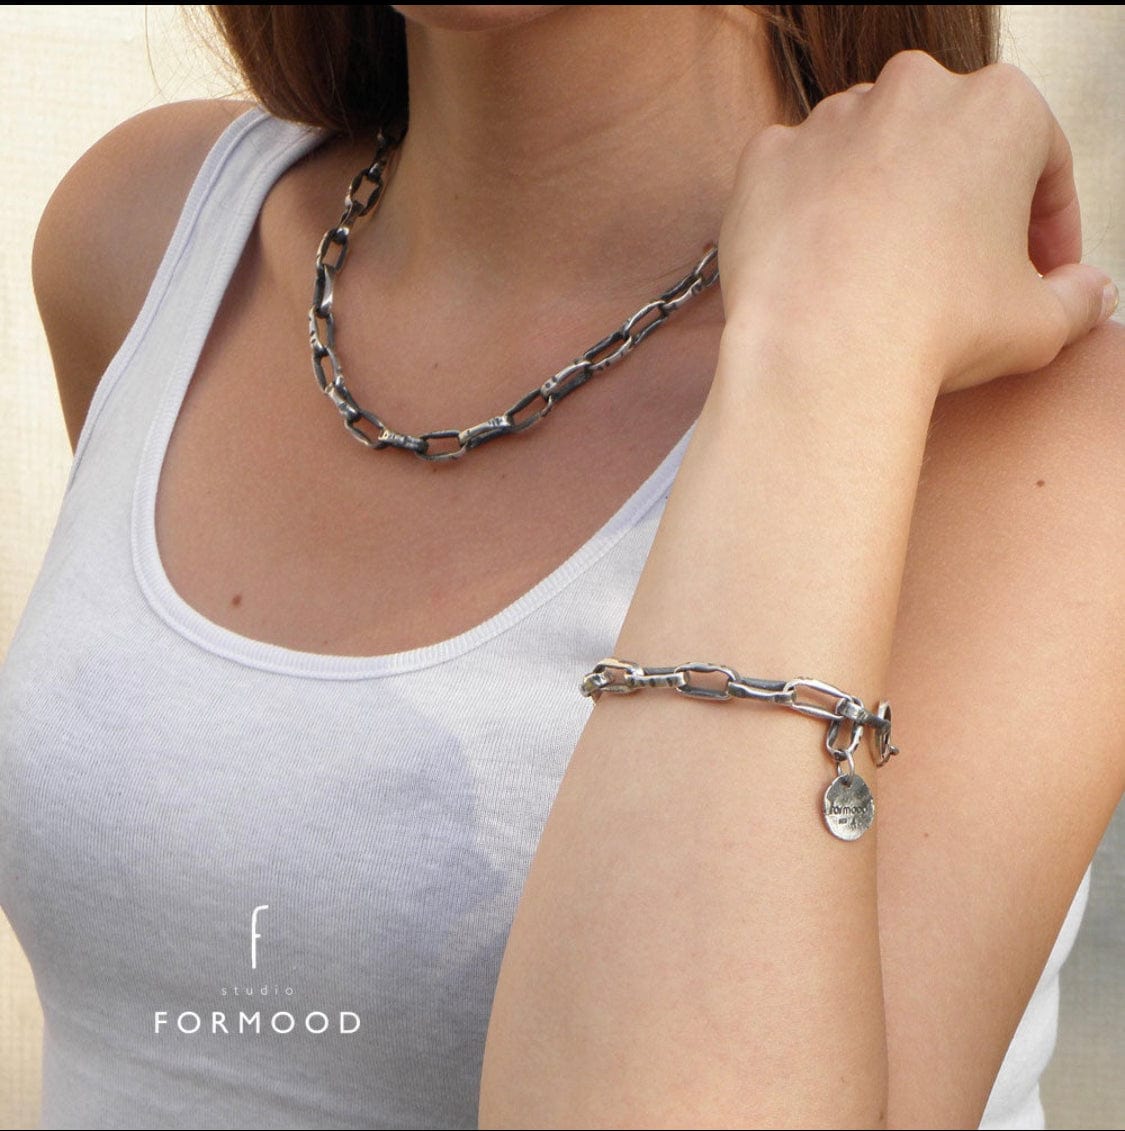 Statement Sterling Silver Chain Necklace FORMOOD